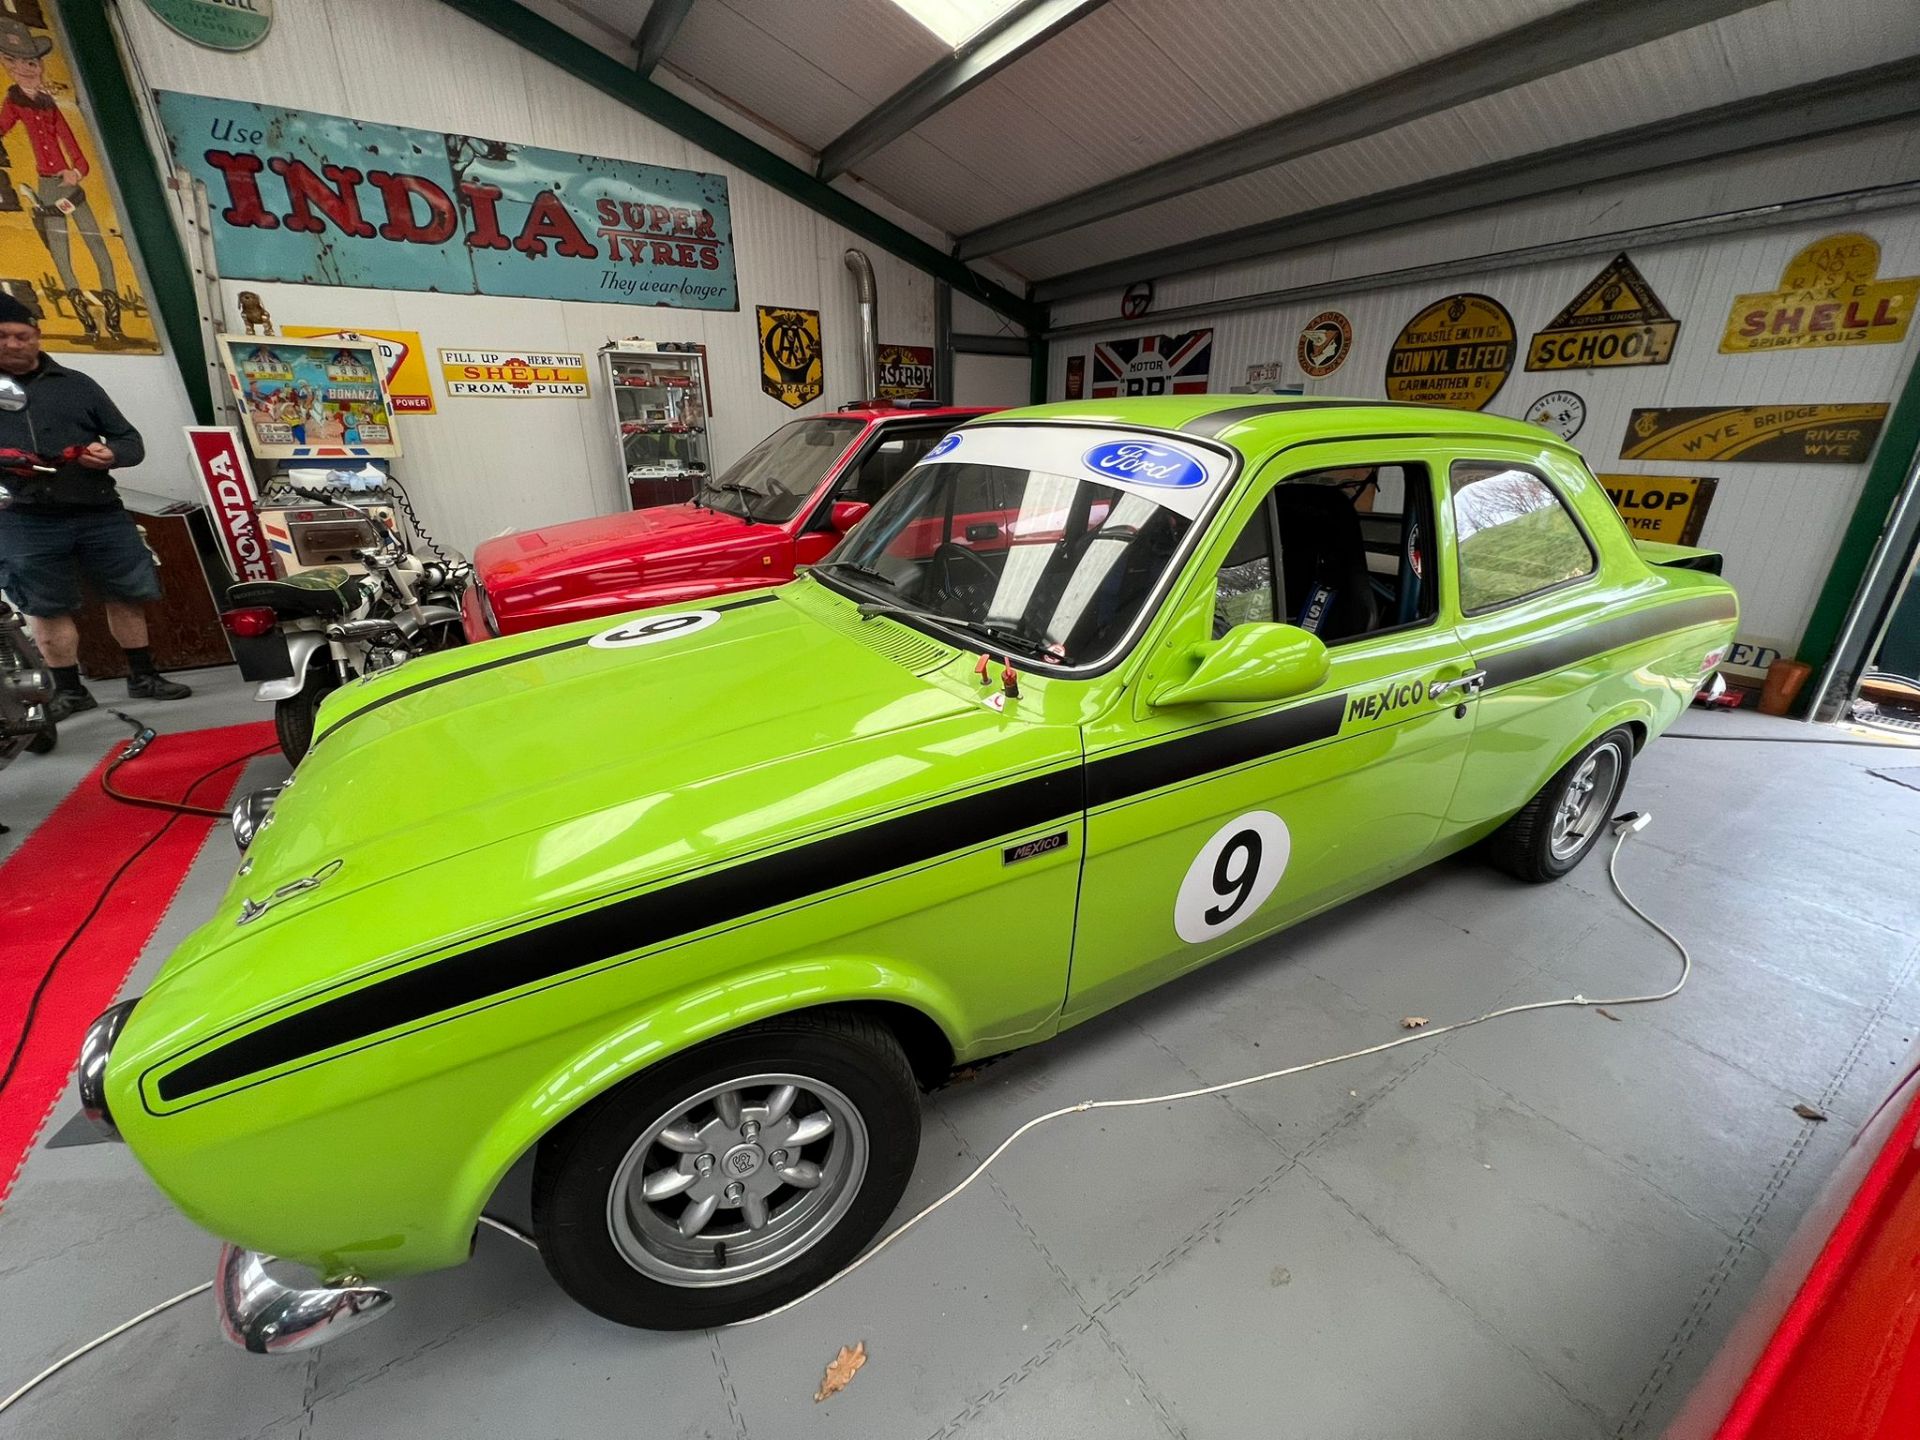 Ford Escort Mk1 X-Sport Mexico Competition Car 1973 - Image 7 of 16